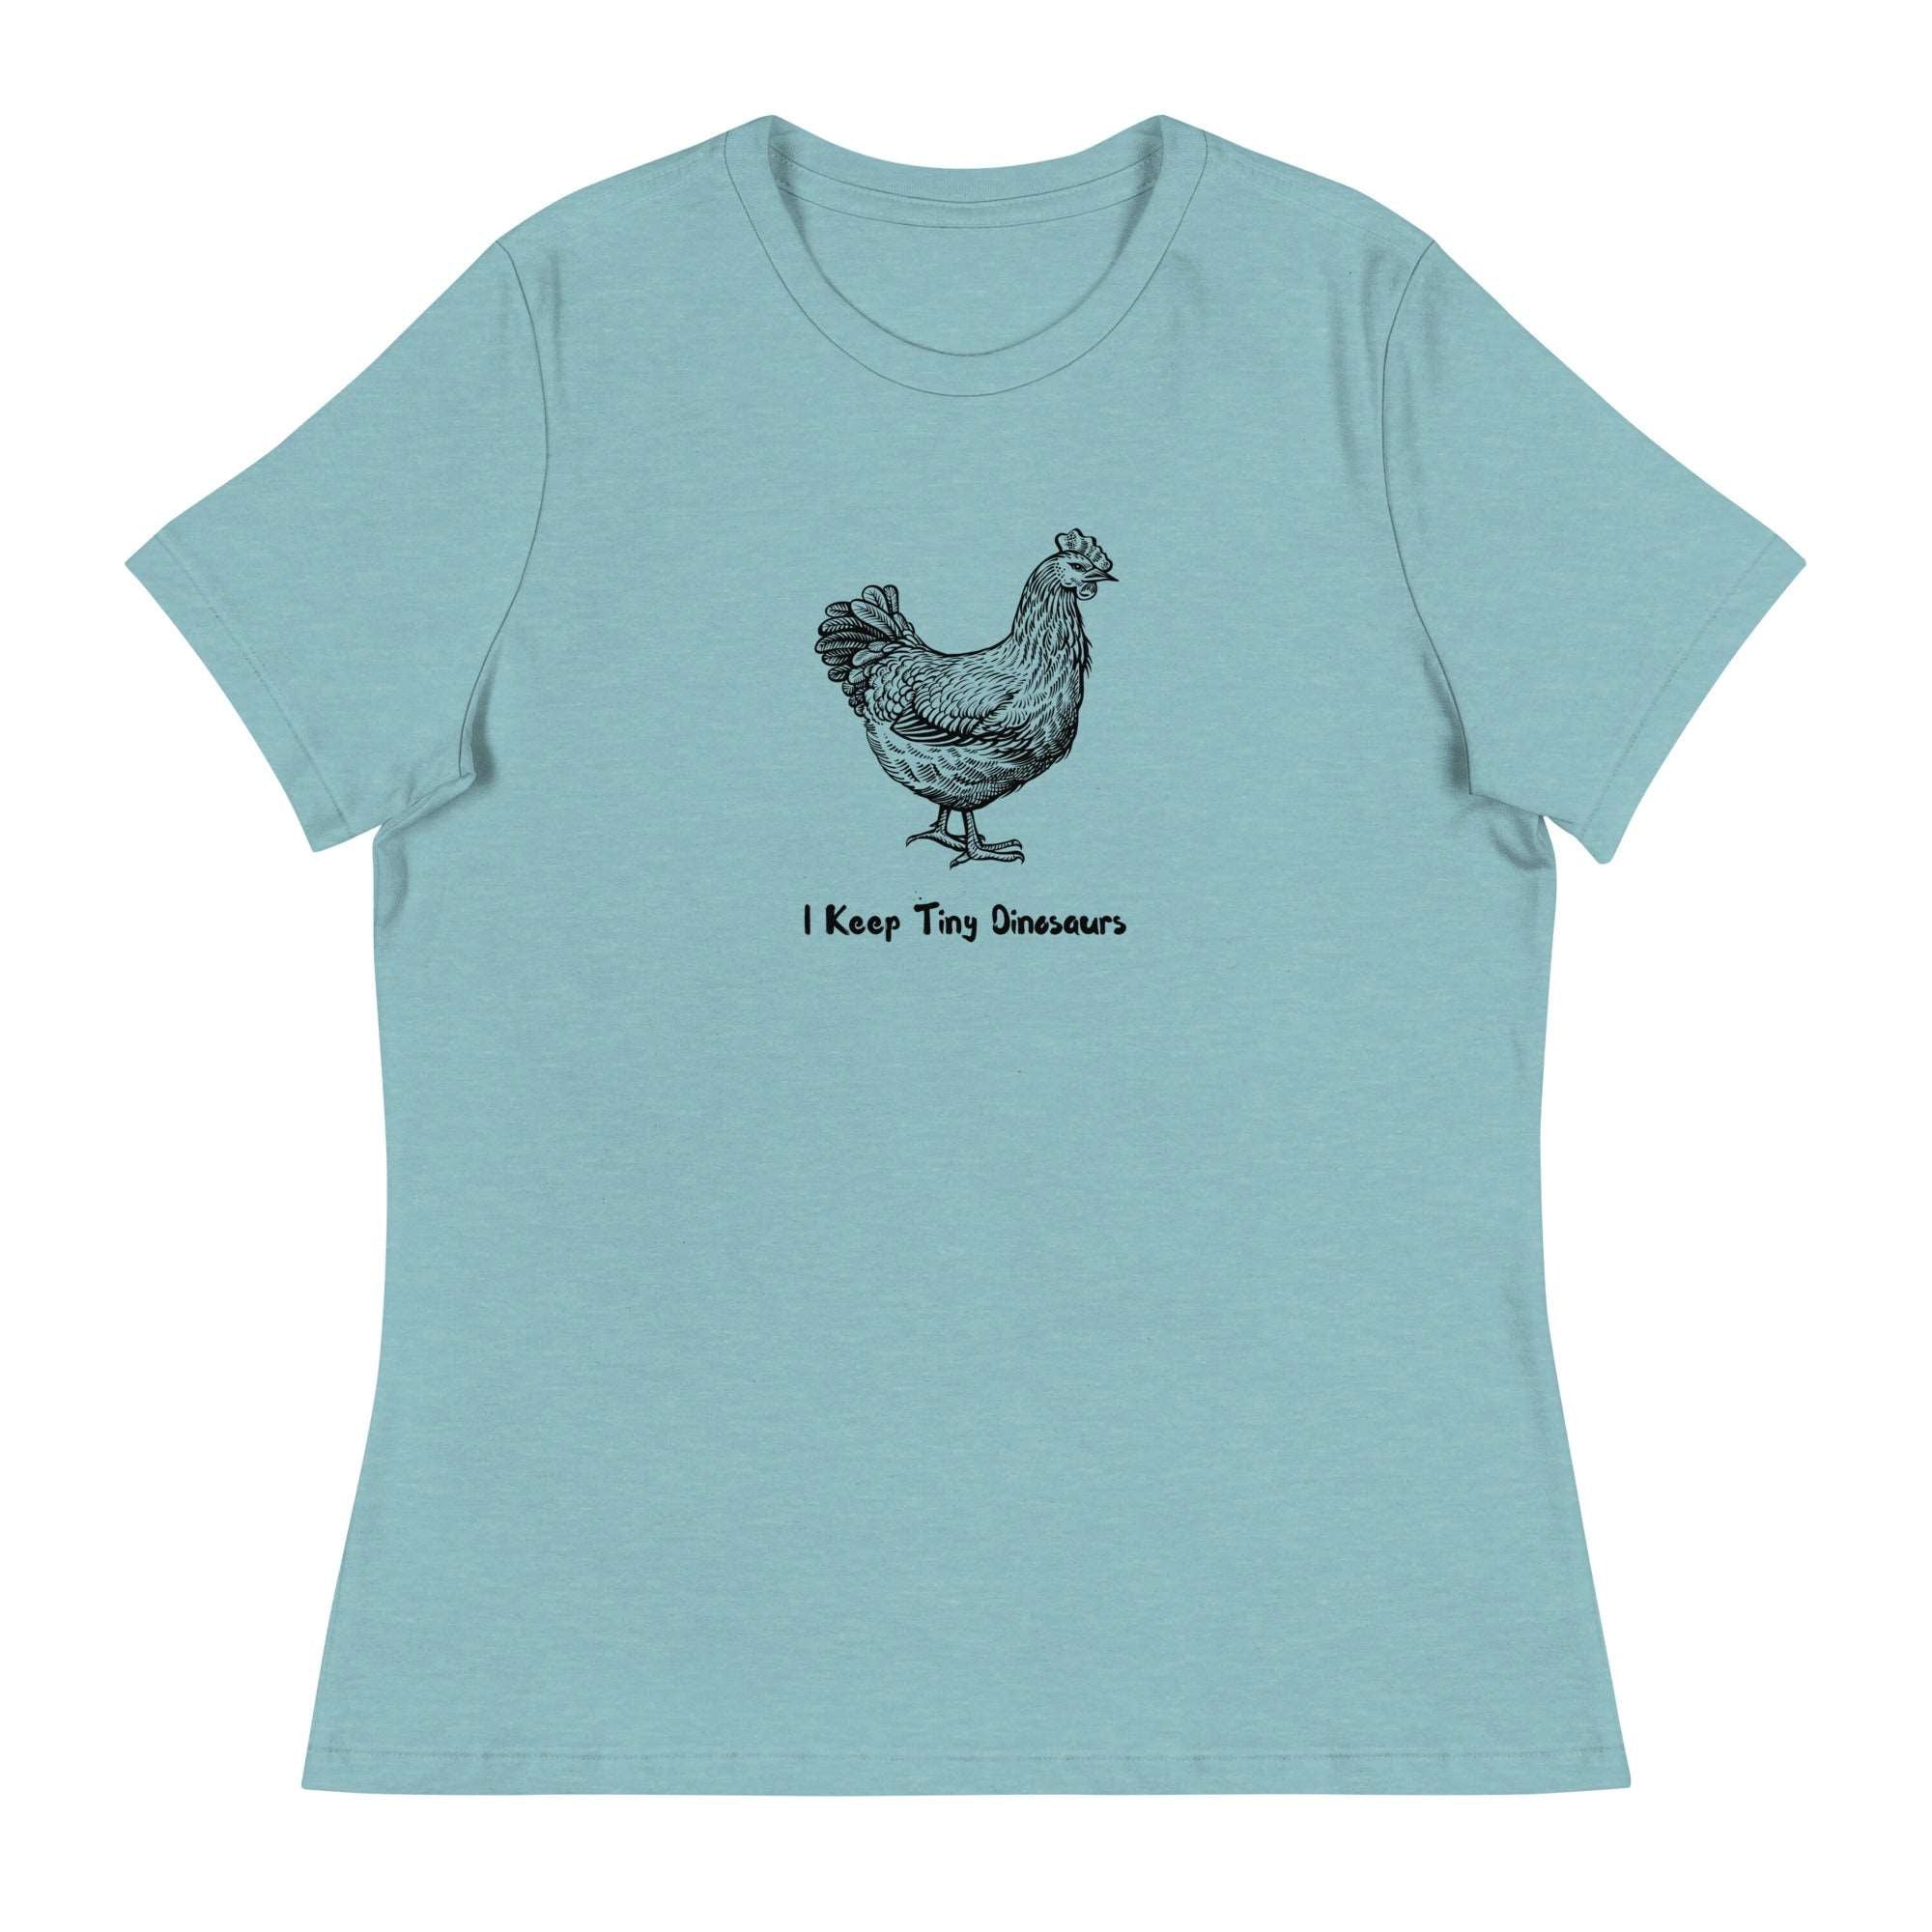 Tiny Dinosaurs Women's Relaxed T-Shirt - Cluck It All Farms